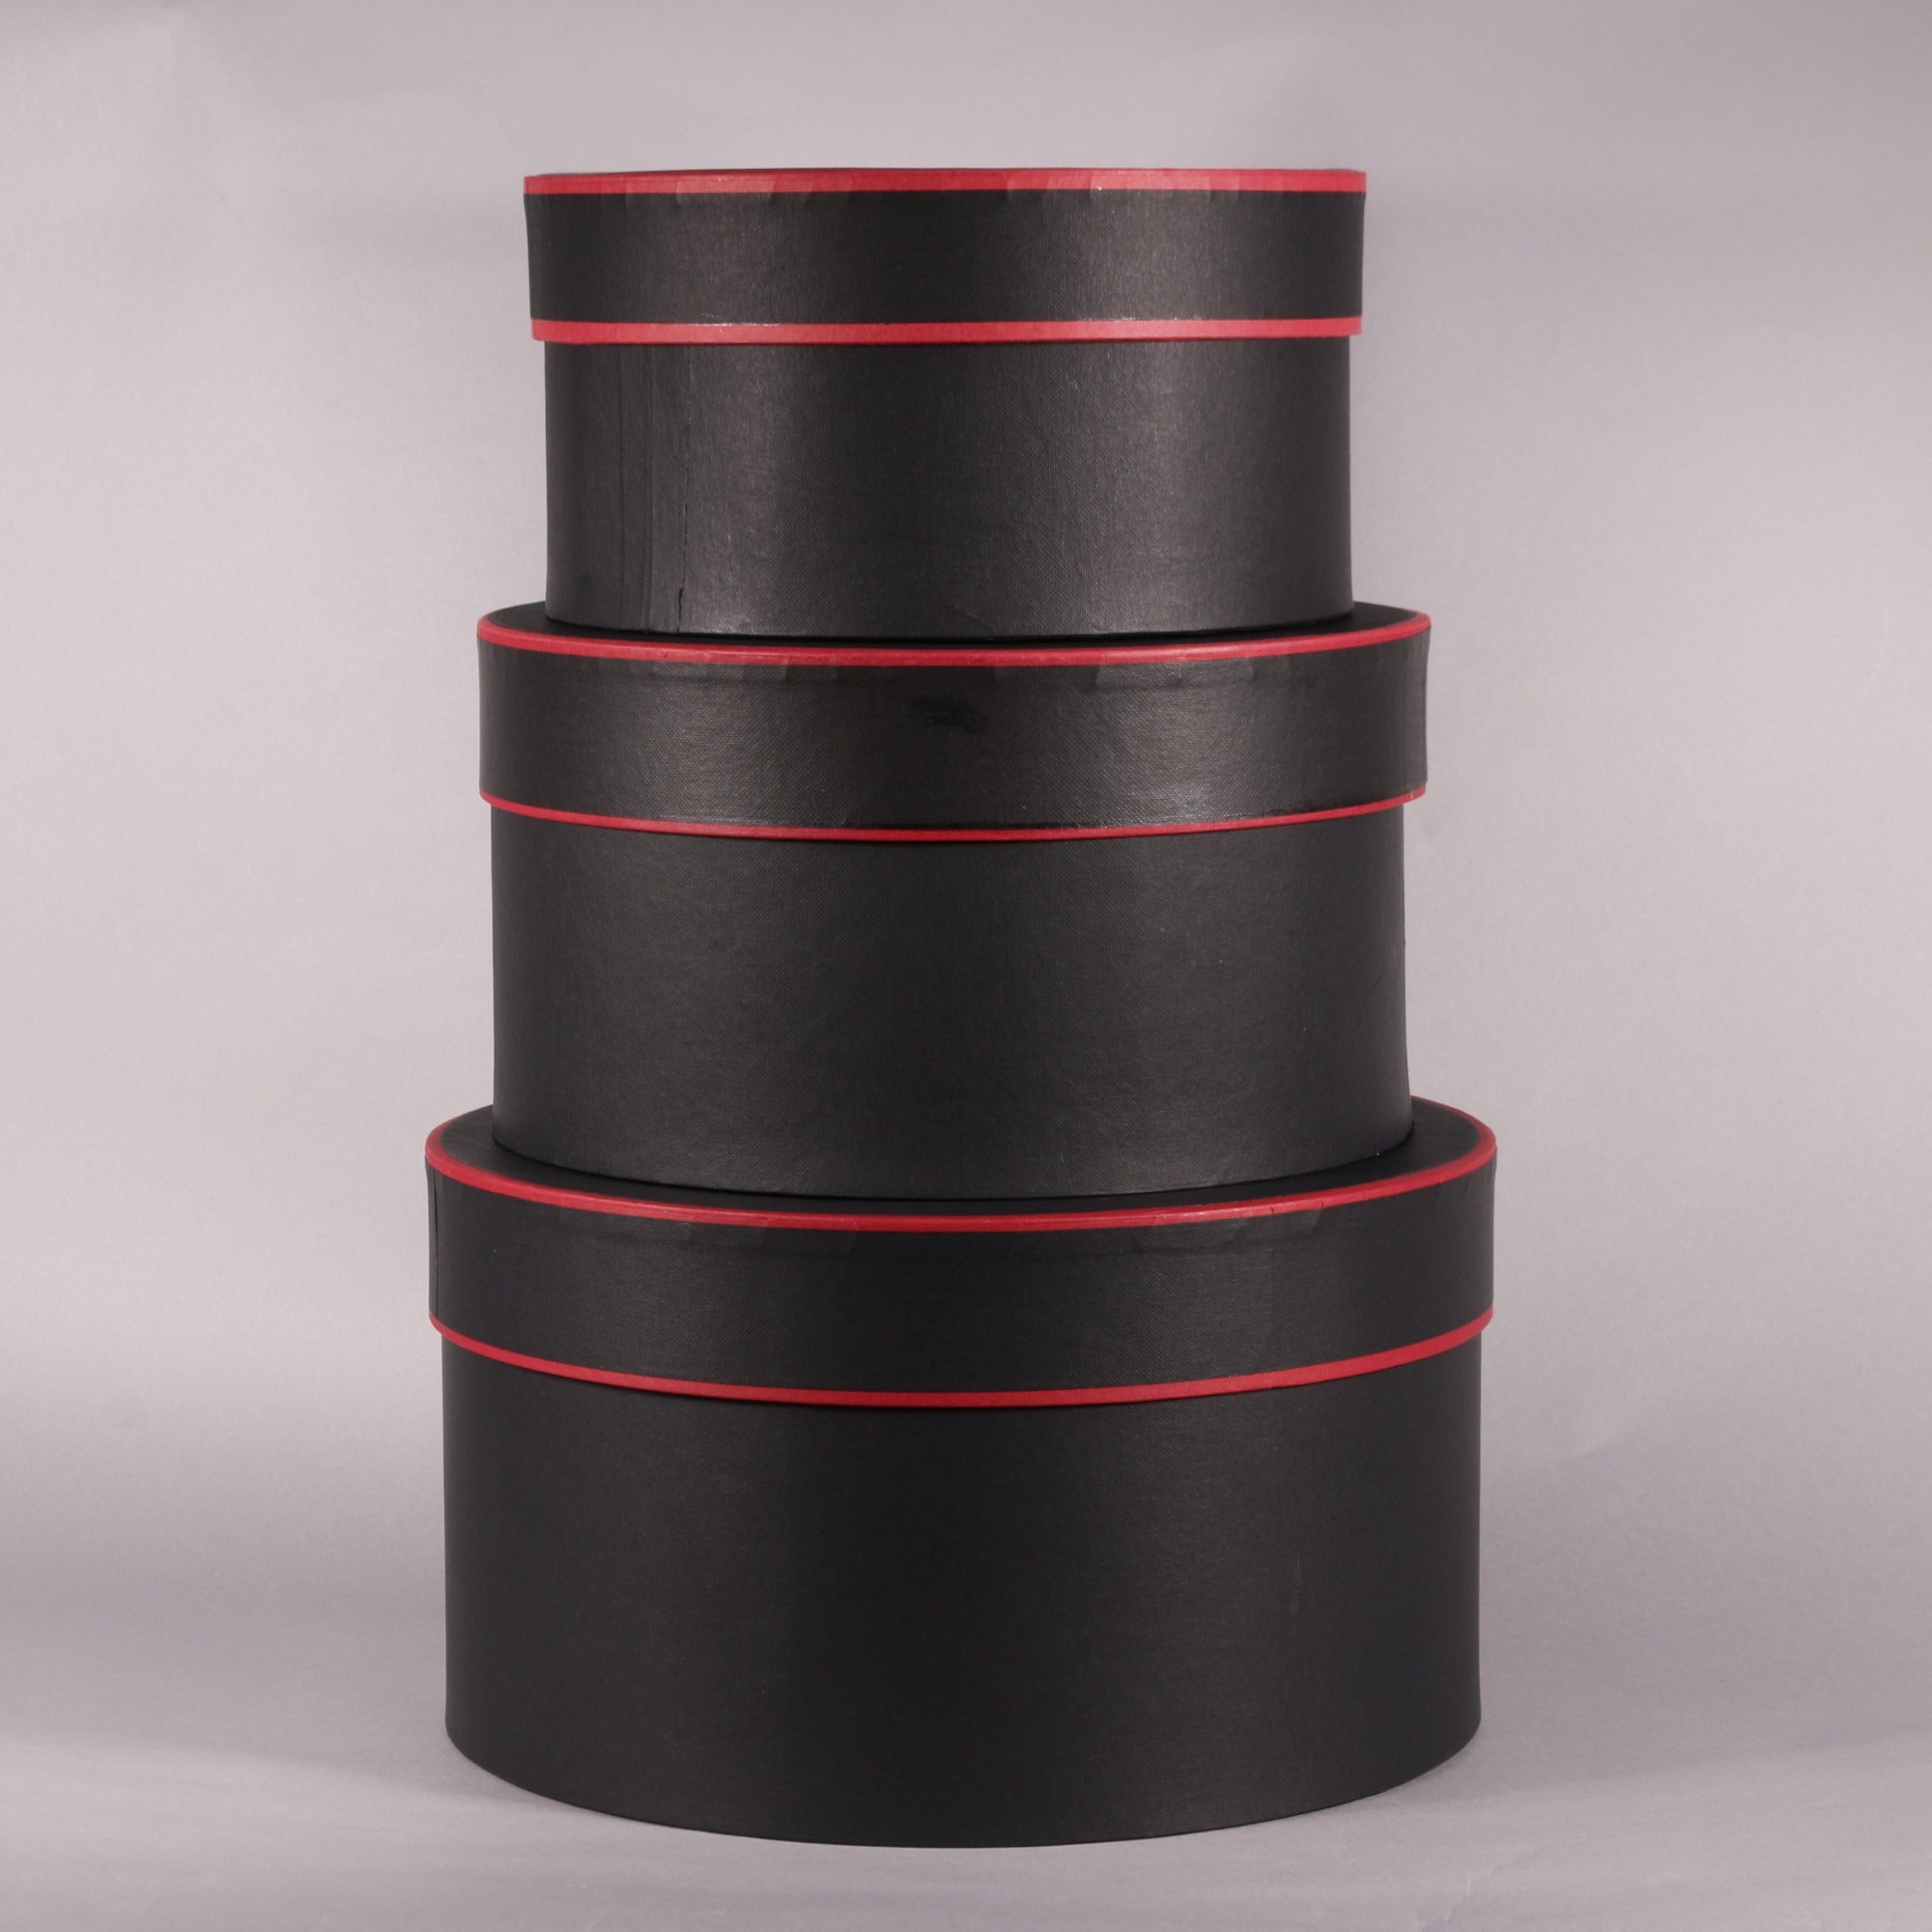 View Black and Red Round Hat Boxes Set of 3 information